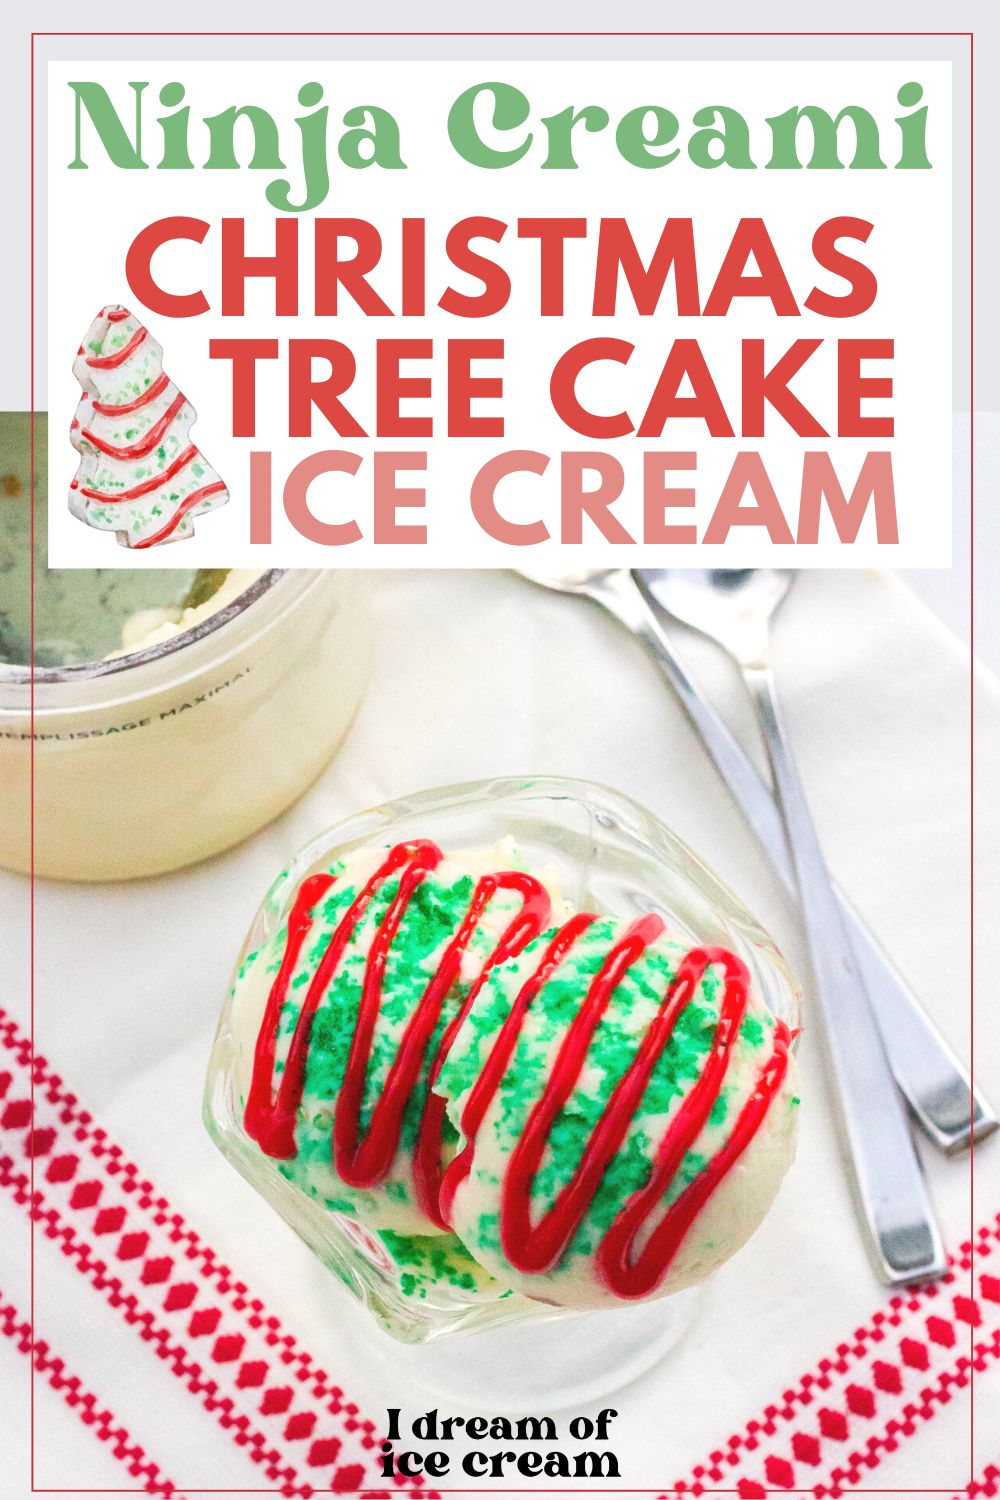 a glass dish serves Ninja Creami Christmas Tree Cake Ice Cream, topped with green sprinkles and red icing.